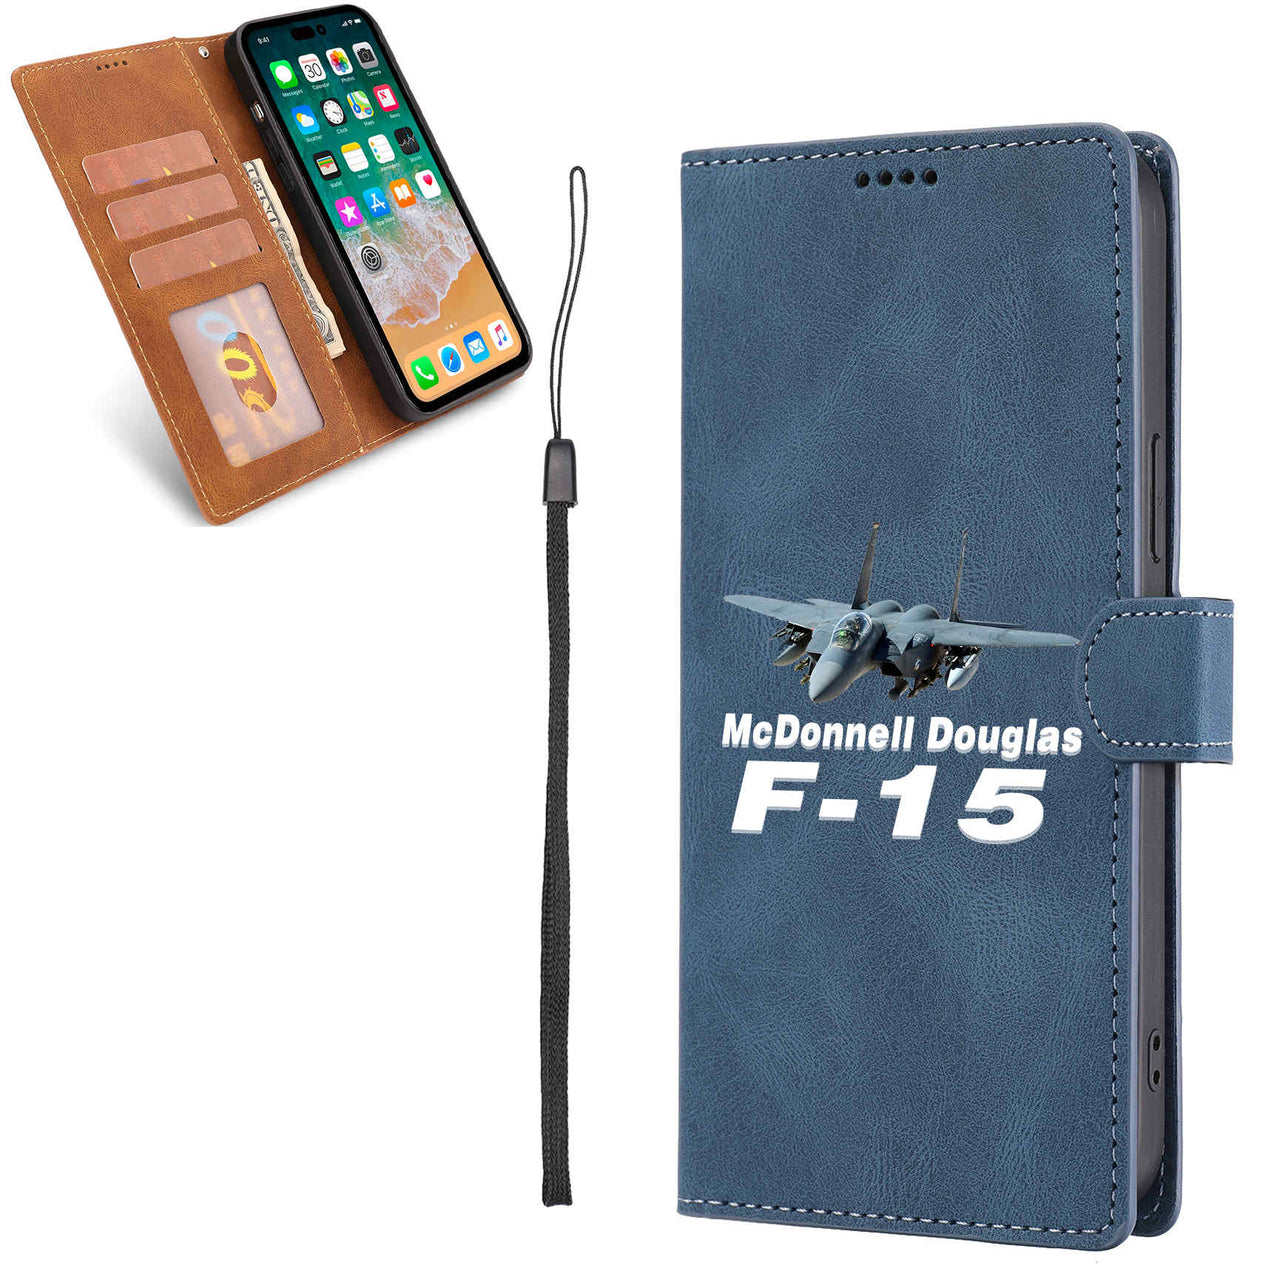 The McDonnell Douglas F15 Leather Samsung A Cases